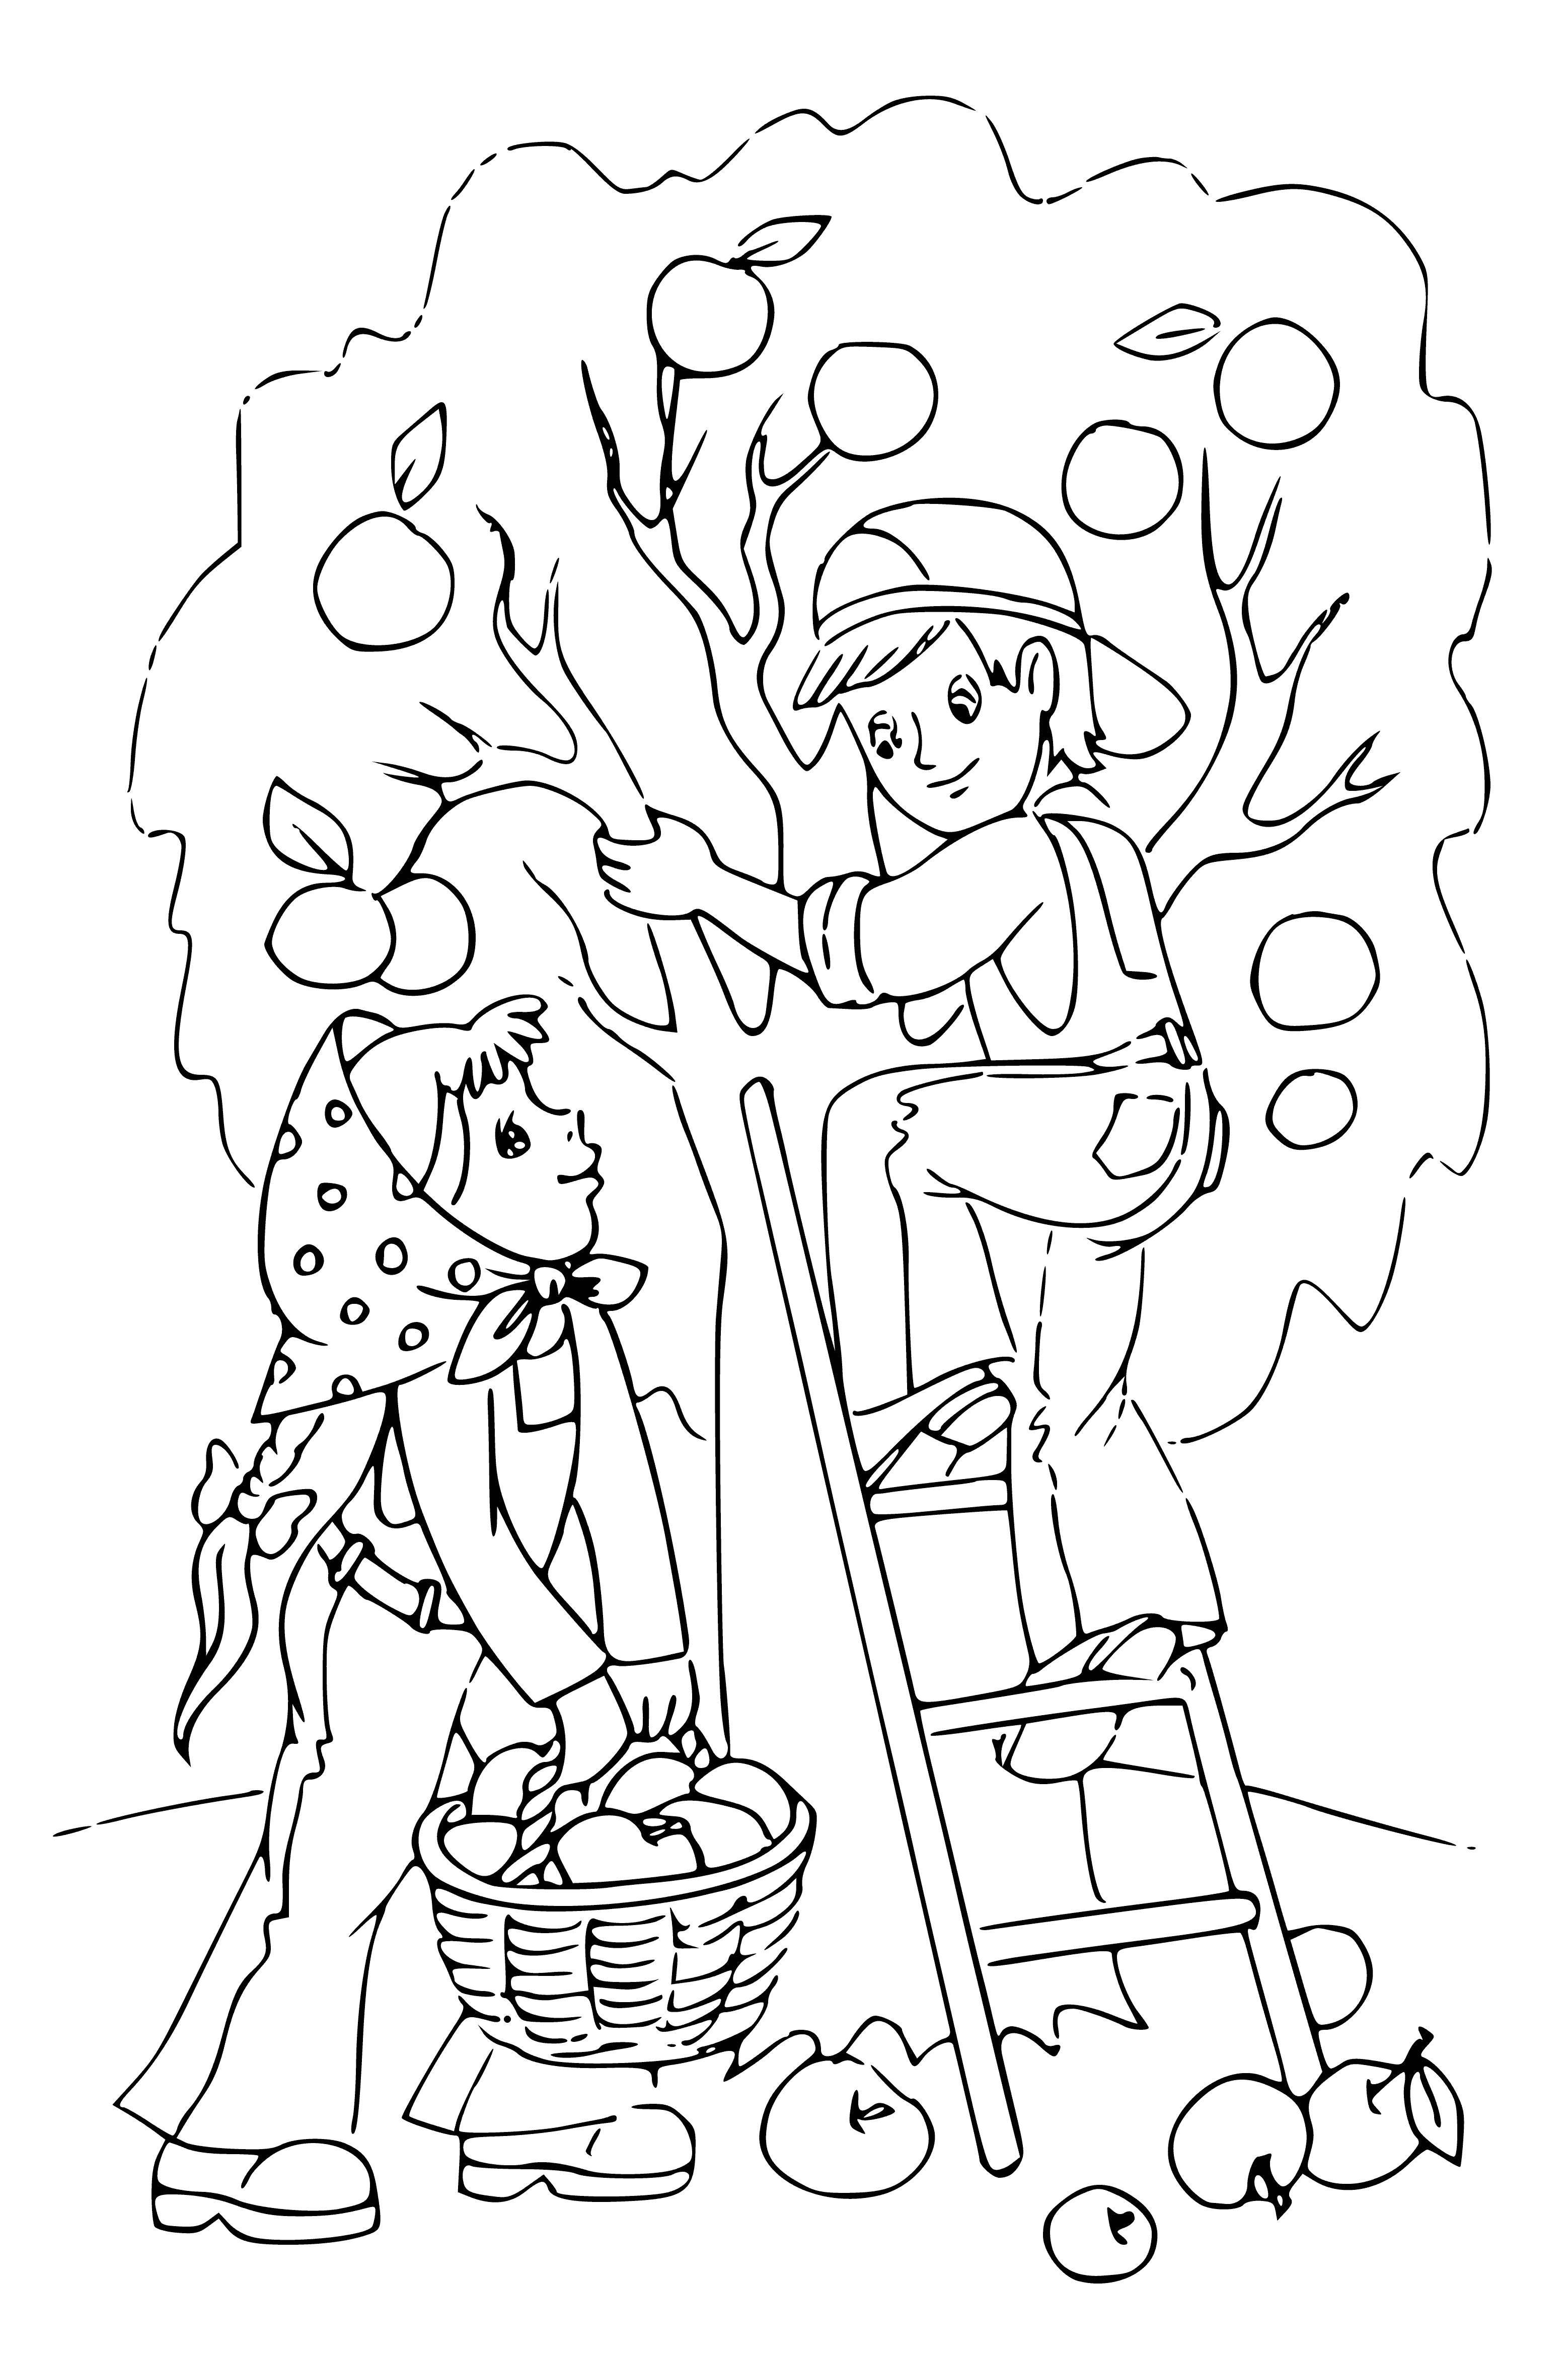 Harvesting coloring page